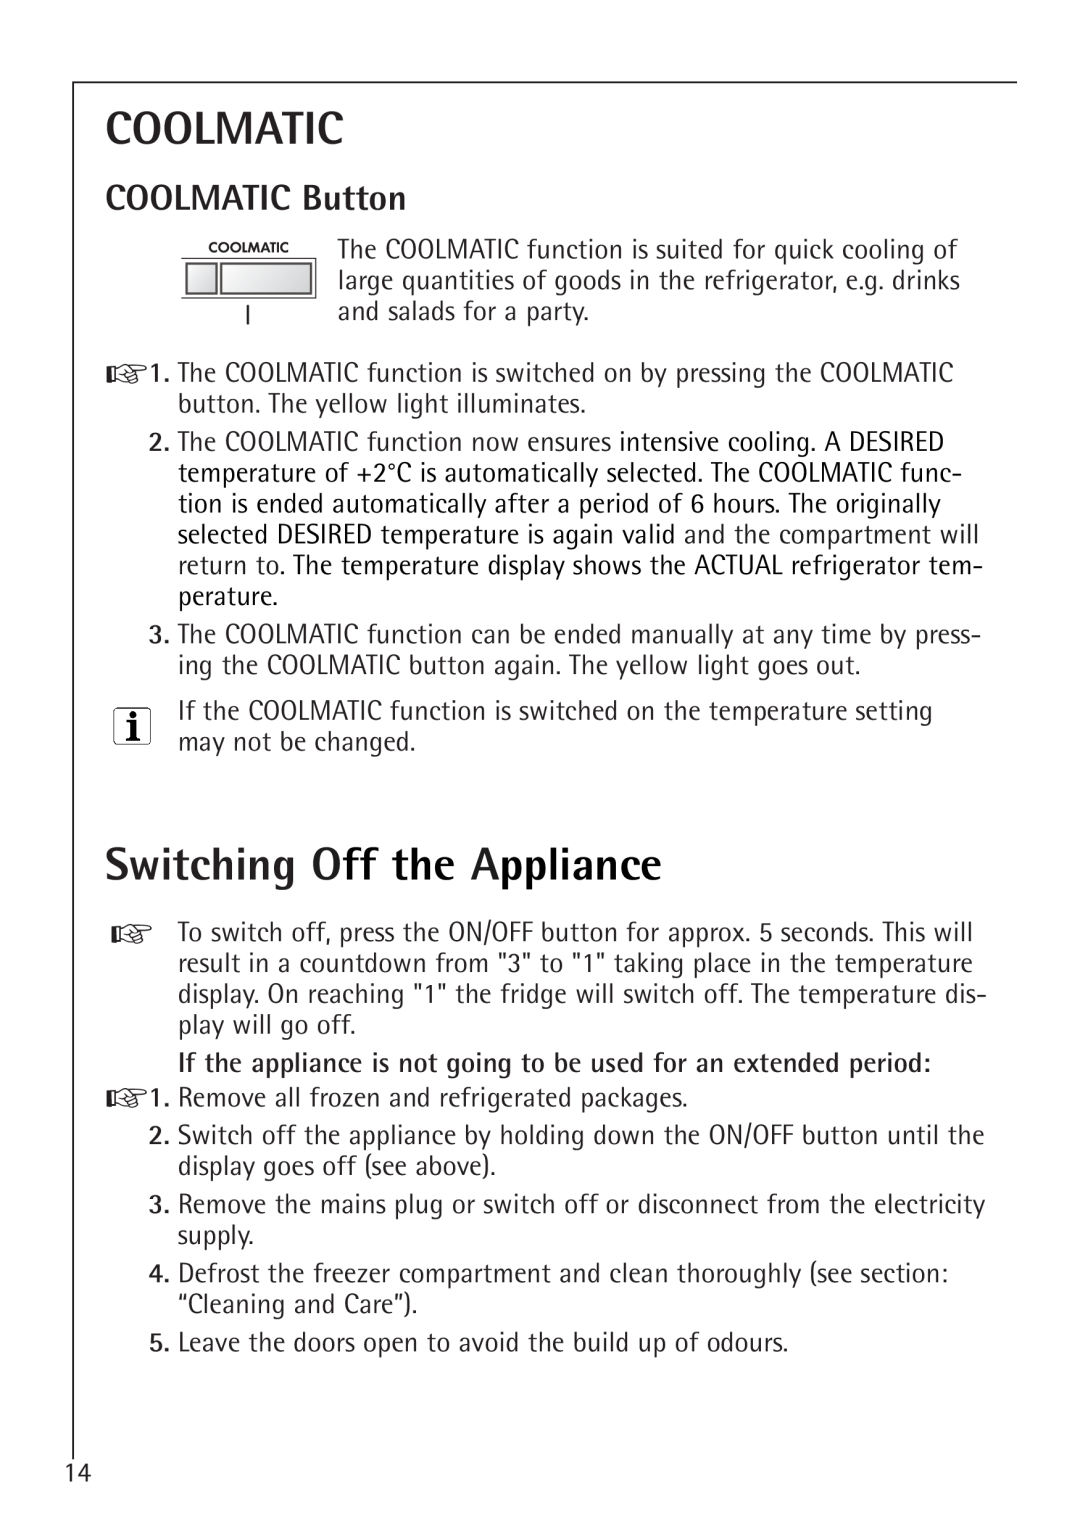 Electrolux K 98840-4 i, K 91240-4 i manual Coolmatic, Switching Off the Appliance, COOLMATIC Button 